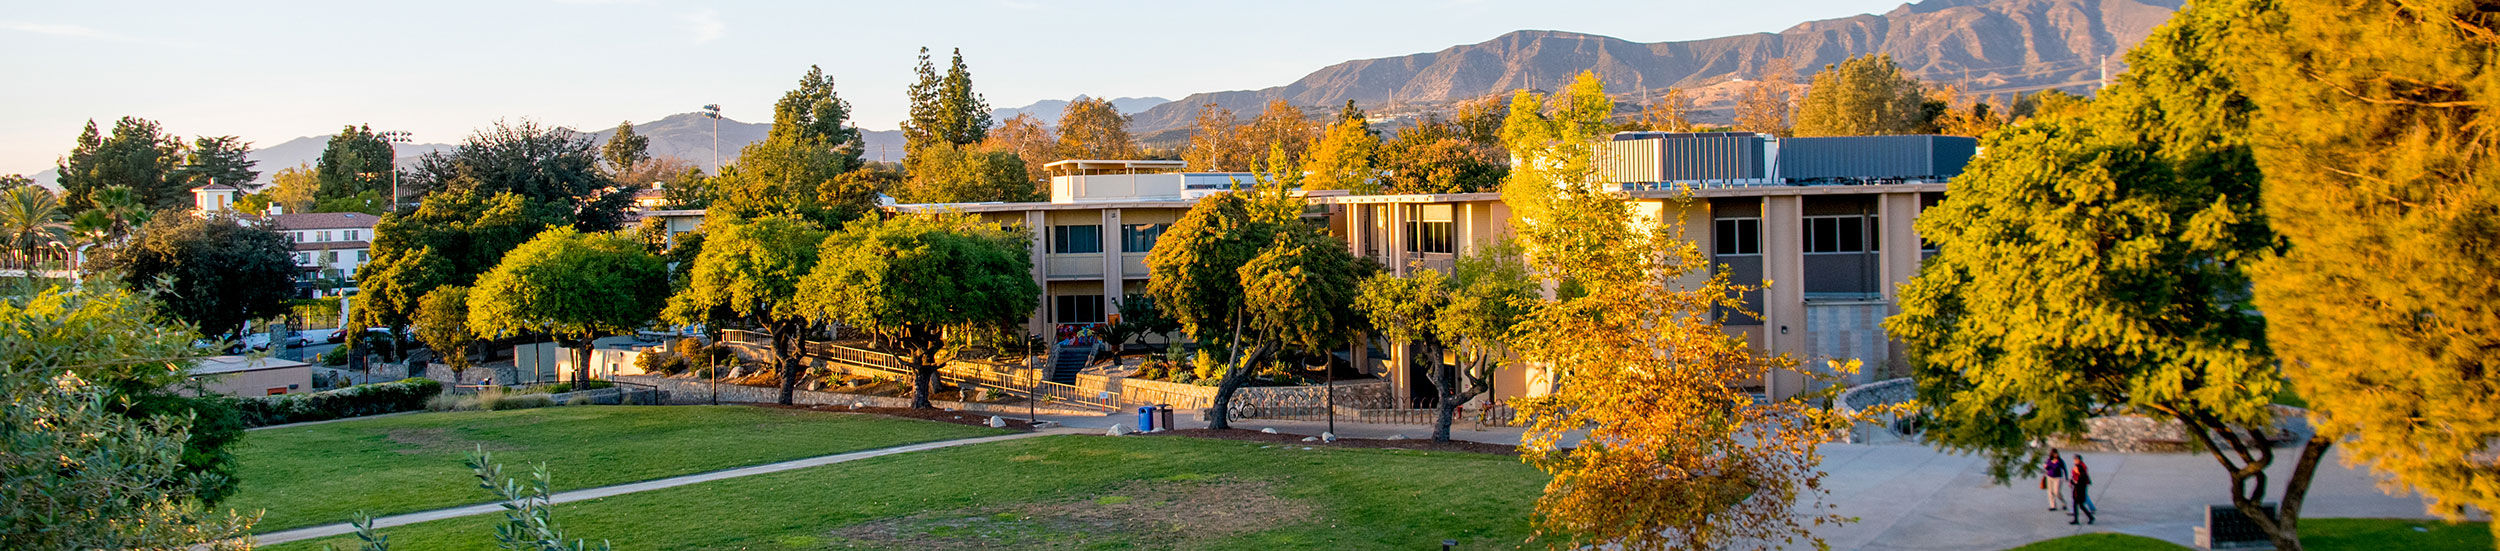 office-of-the-registrar-pitzer-college